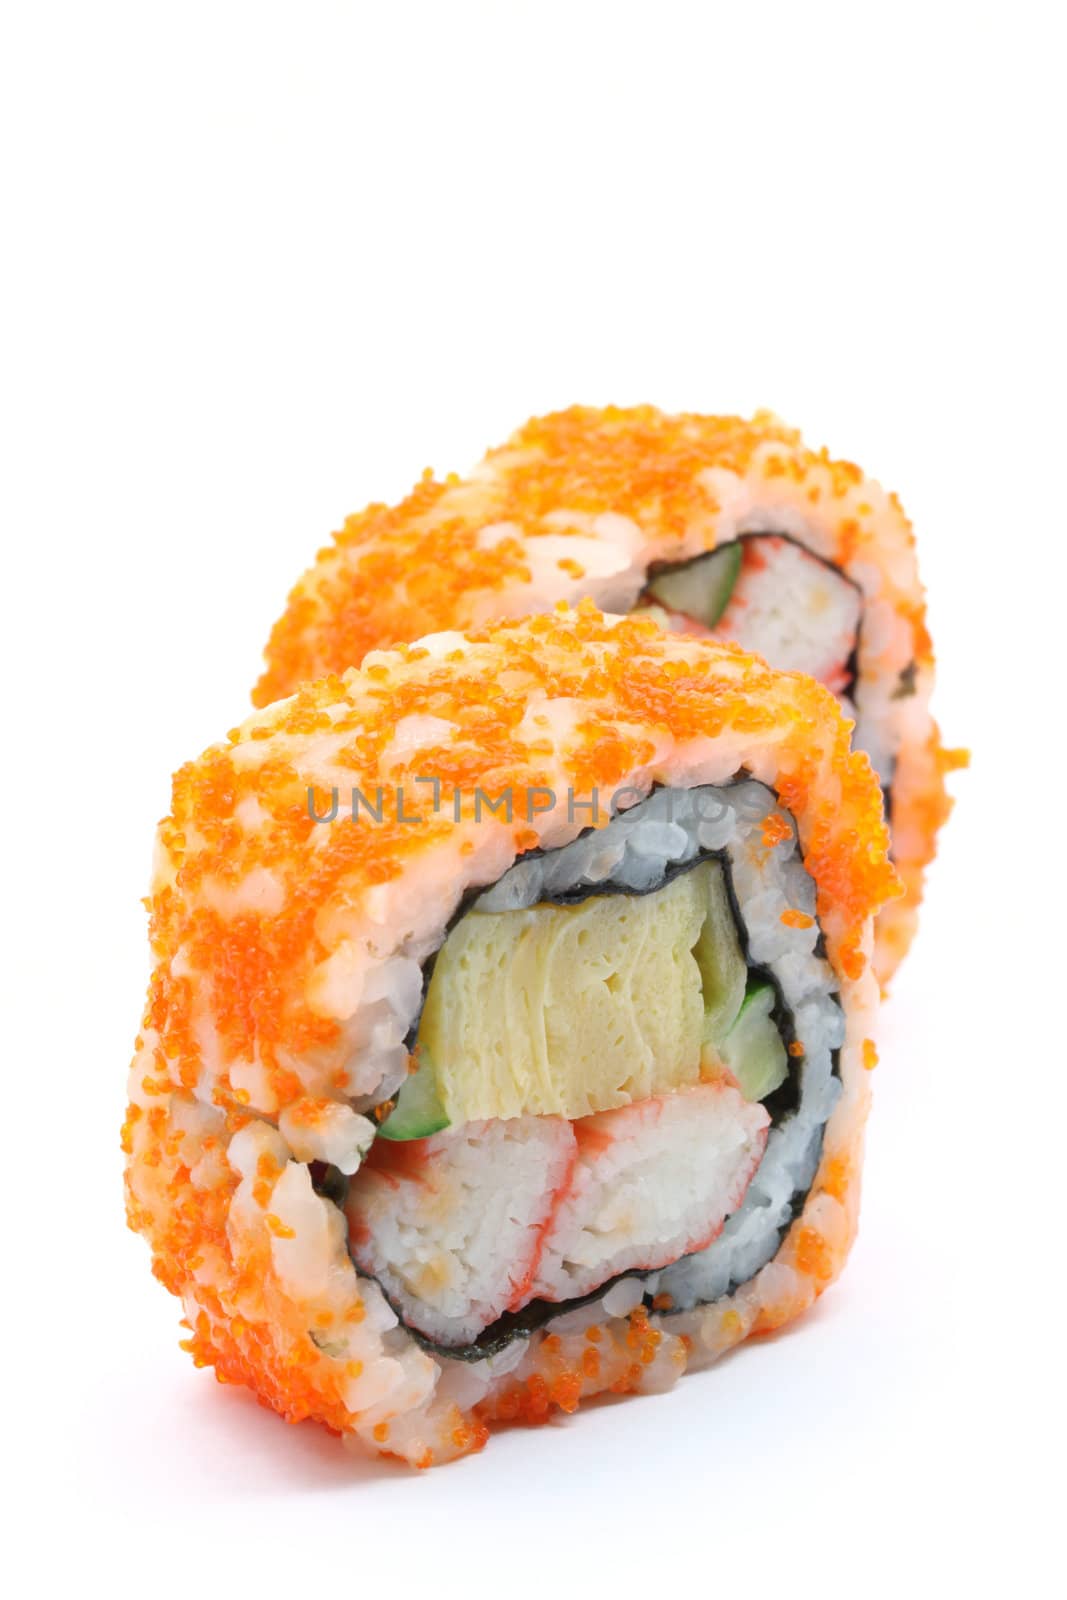 Maki Sushi on white background (selective focus on front piece)